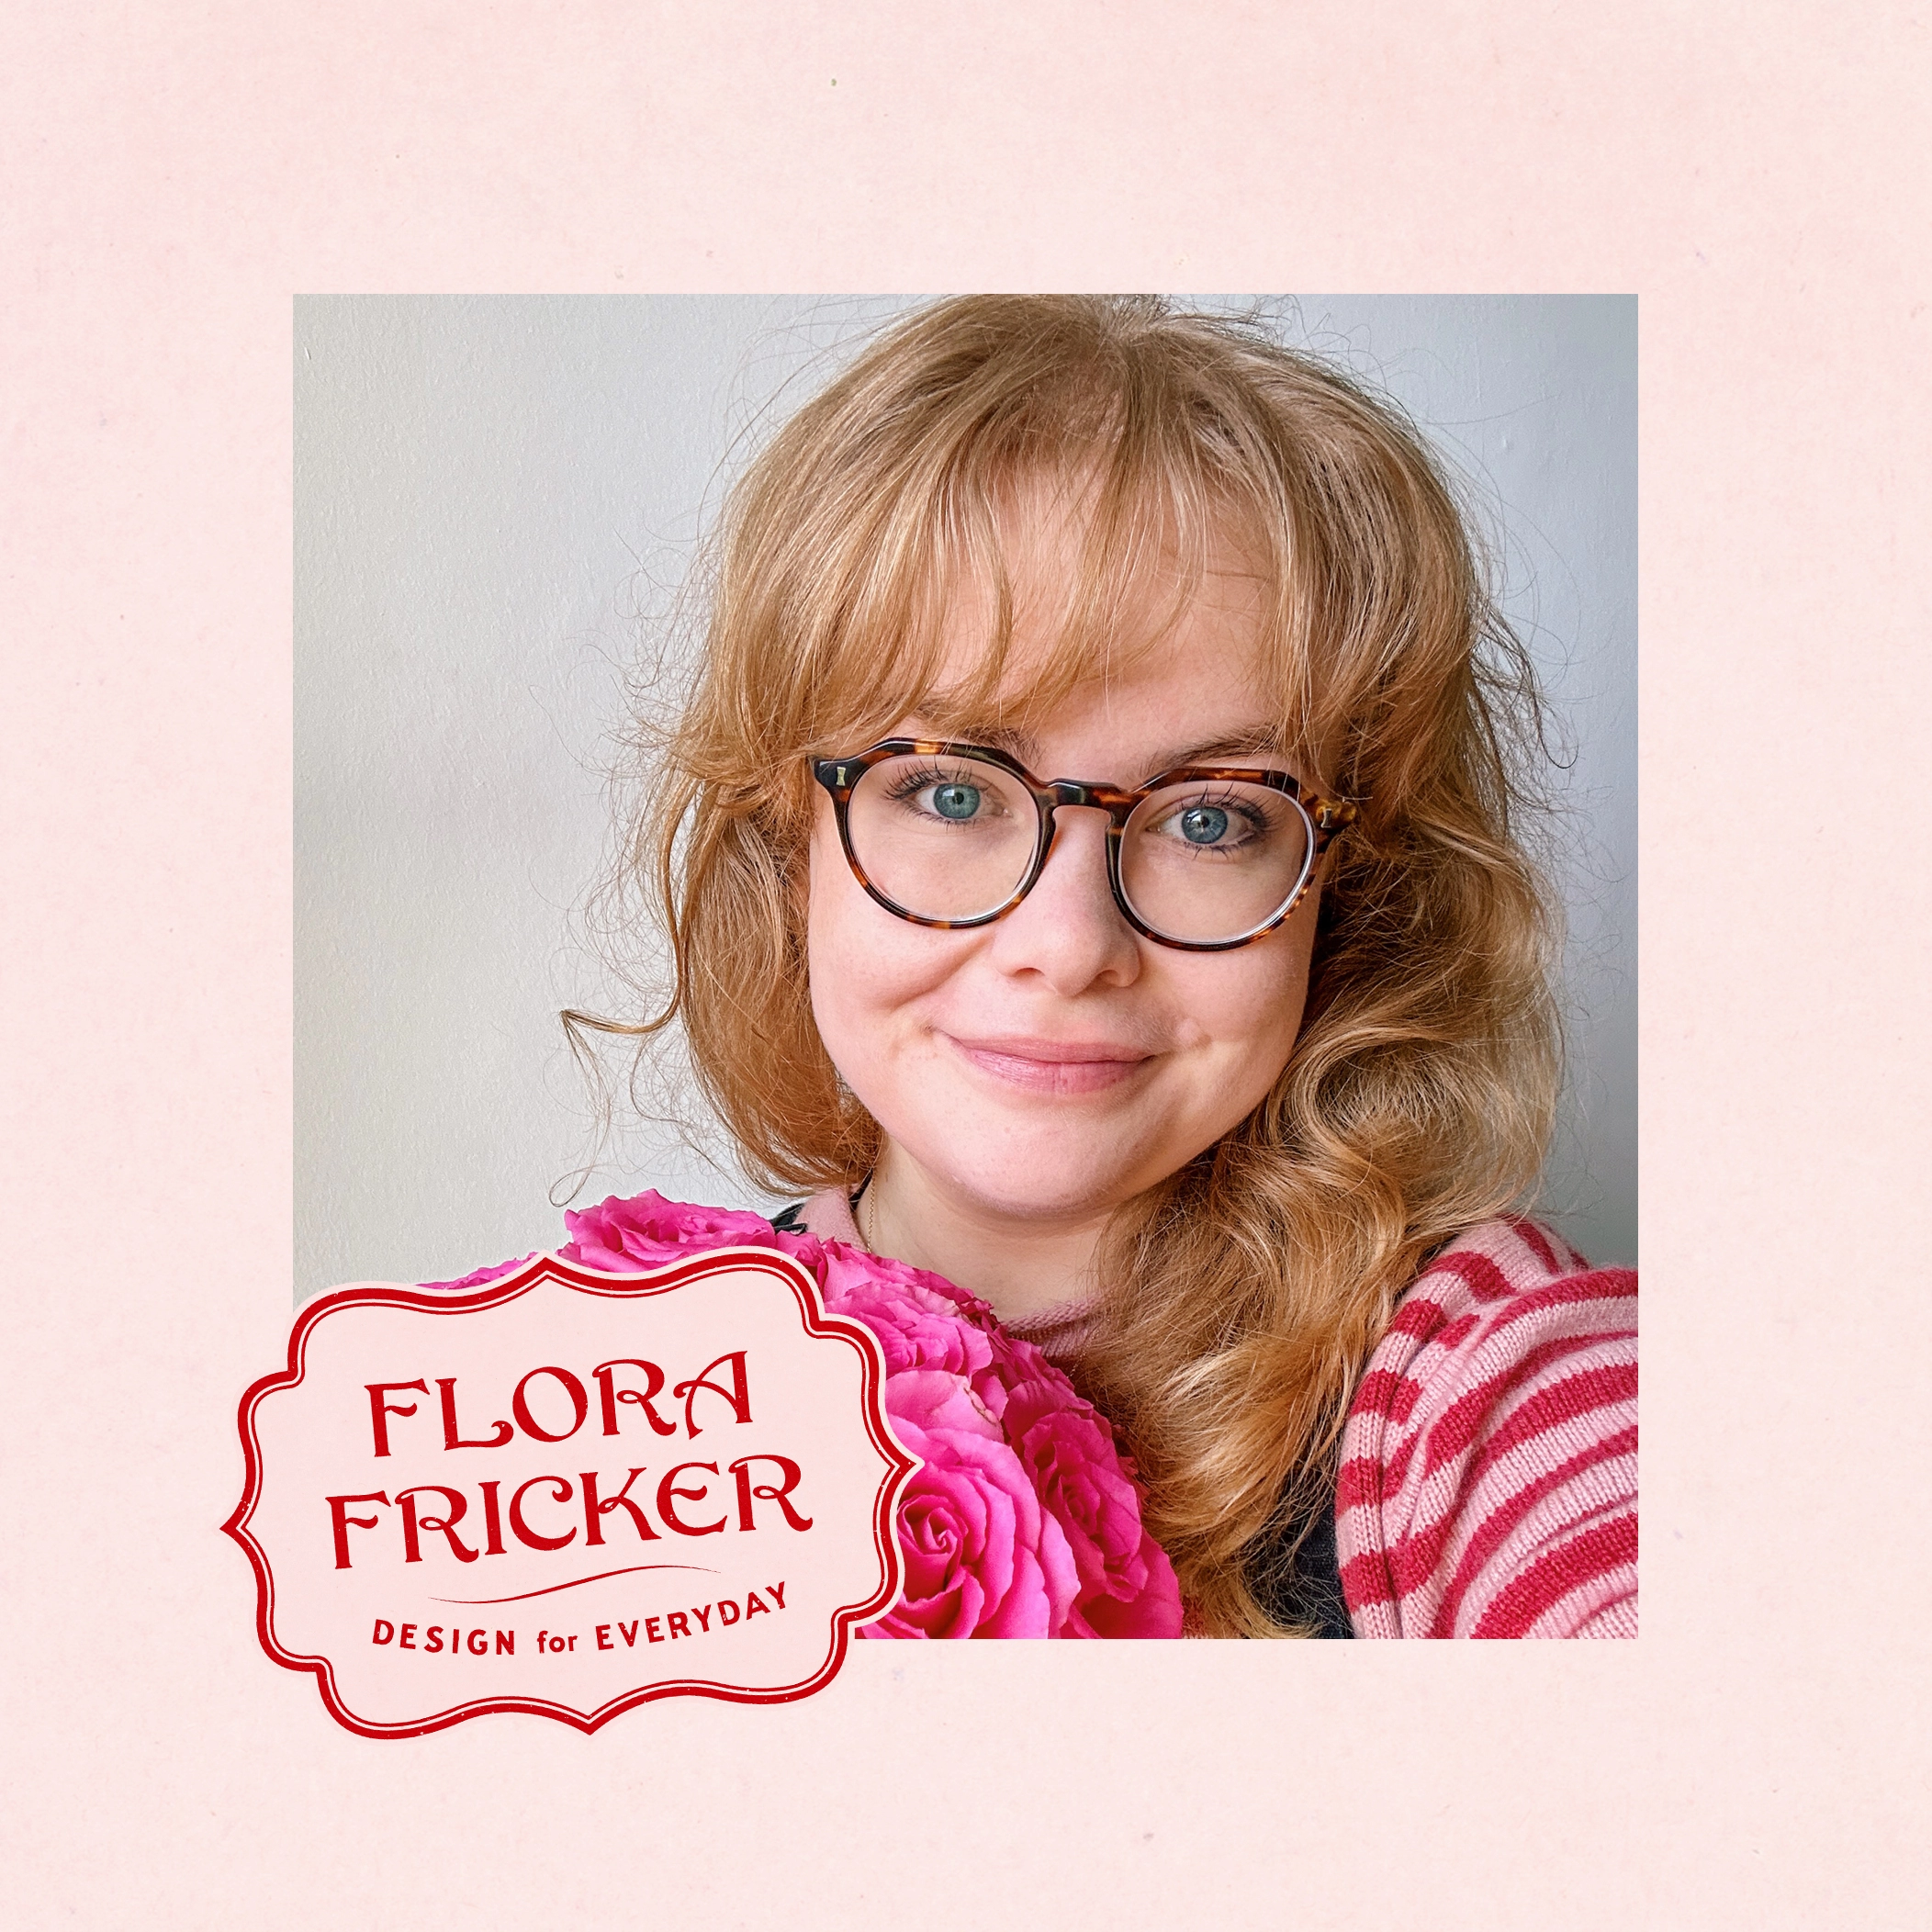 Flora Fricker self portrait, with logo, graphic designer, design for everyday, pink and red